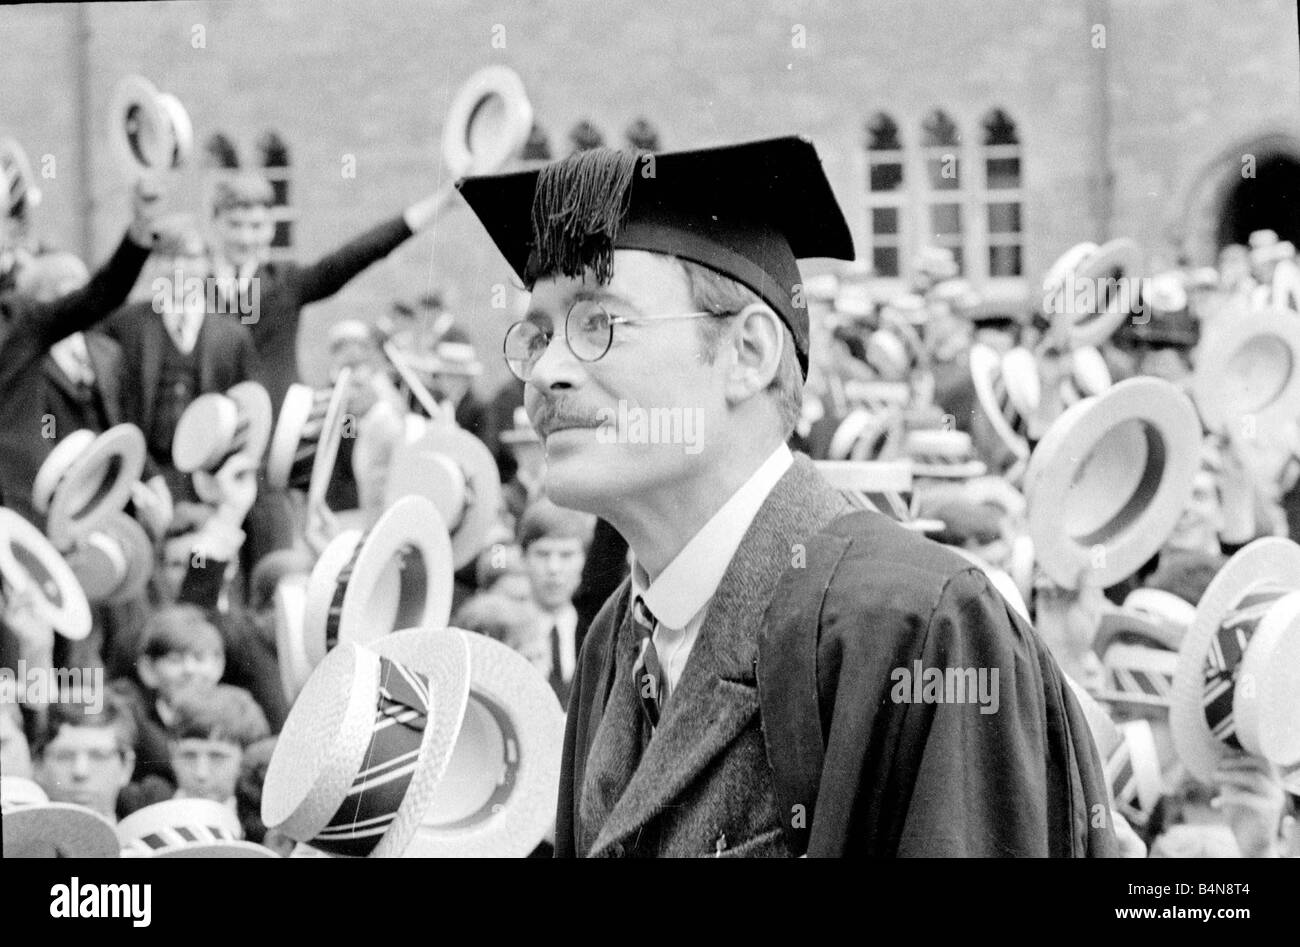 Actor Peter O Toole during the filming of Goodbye Mr Chips at Sherborne Public School Graduation hat July 1968 Stock Photo